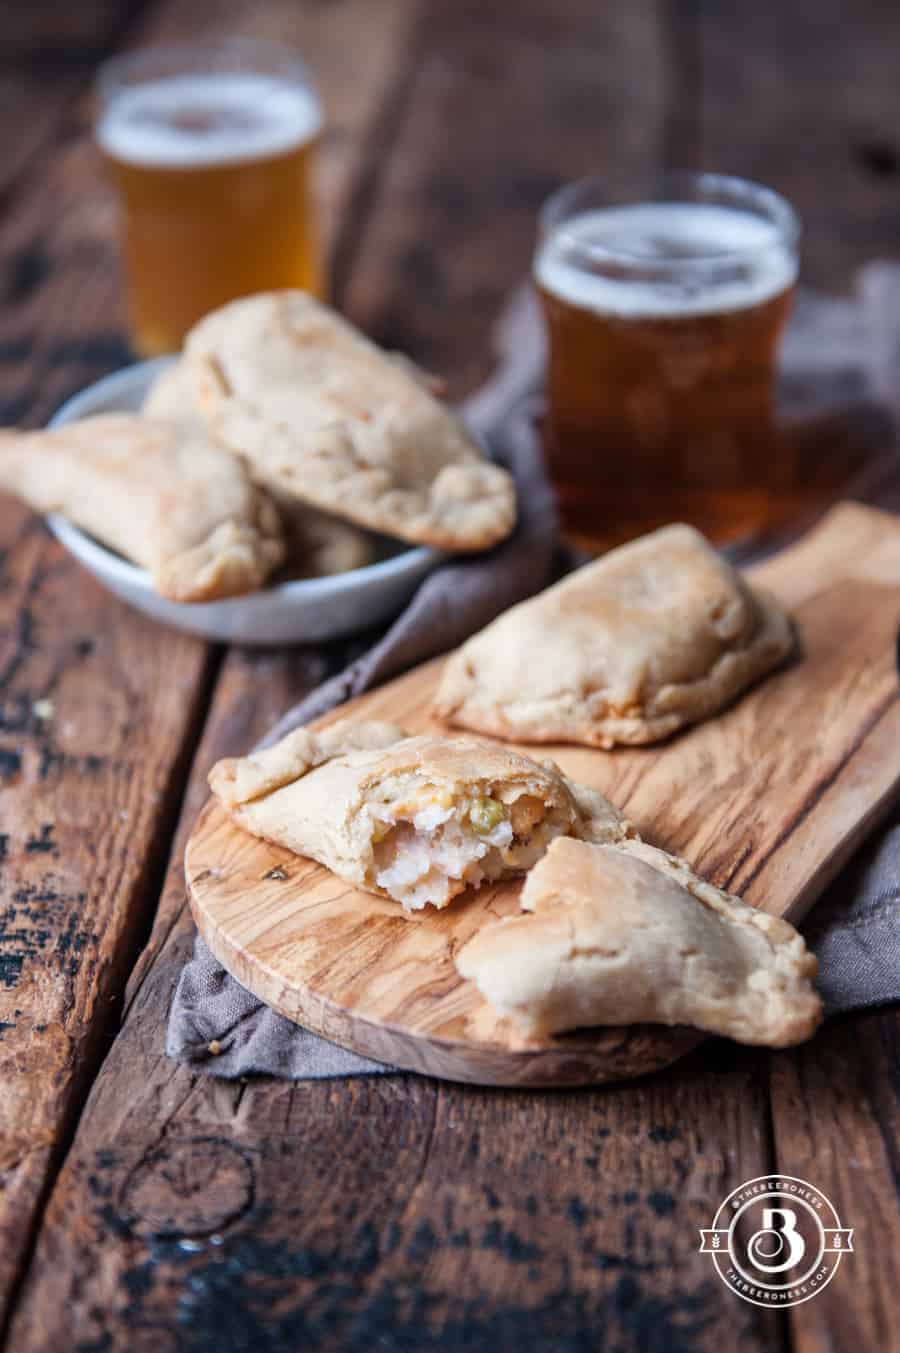 Two turkey empanadas on a wood cutting board by a glass of beer.